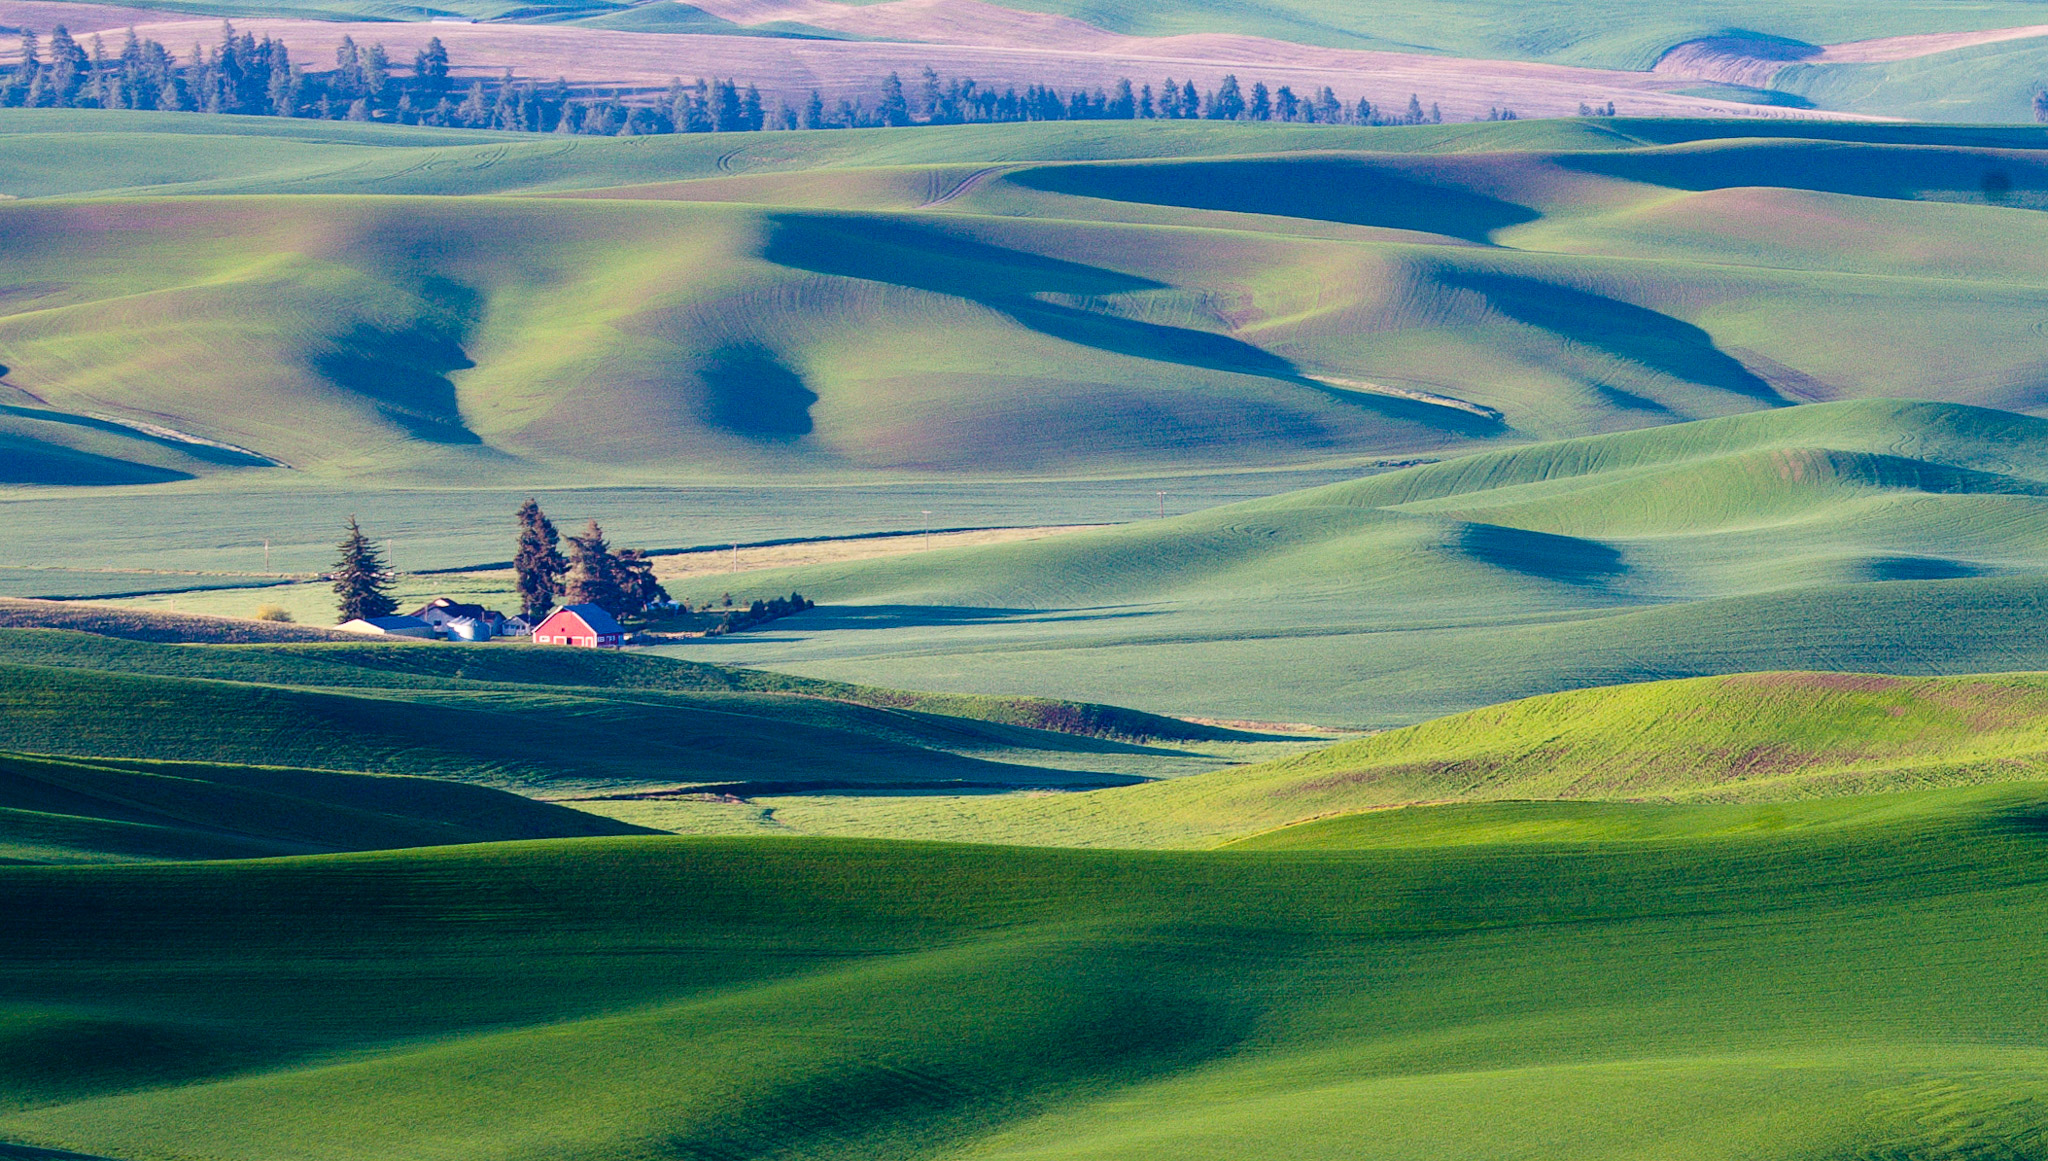 Early morning views from Steptoe Butte, The Palouse